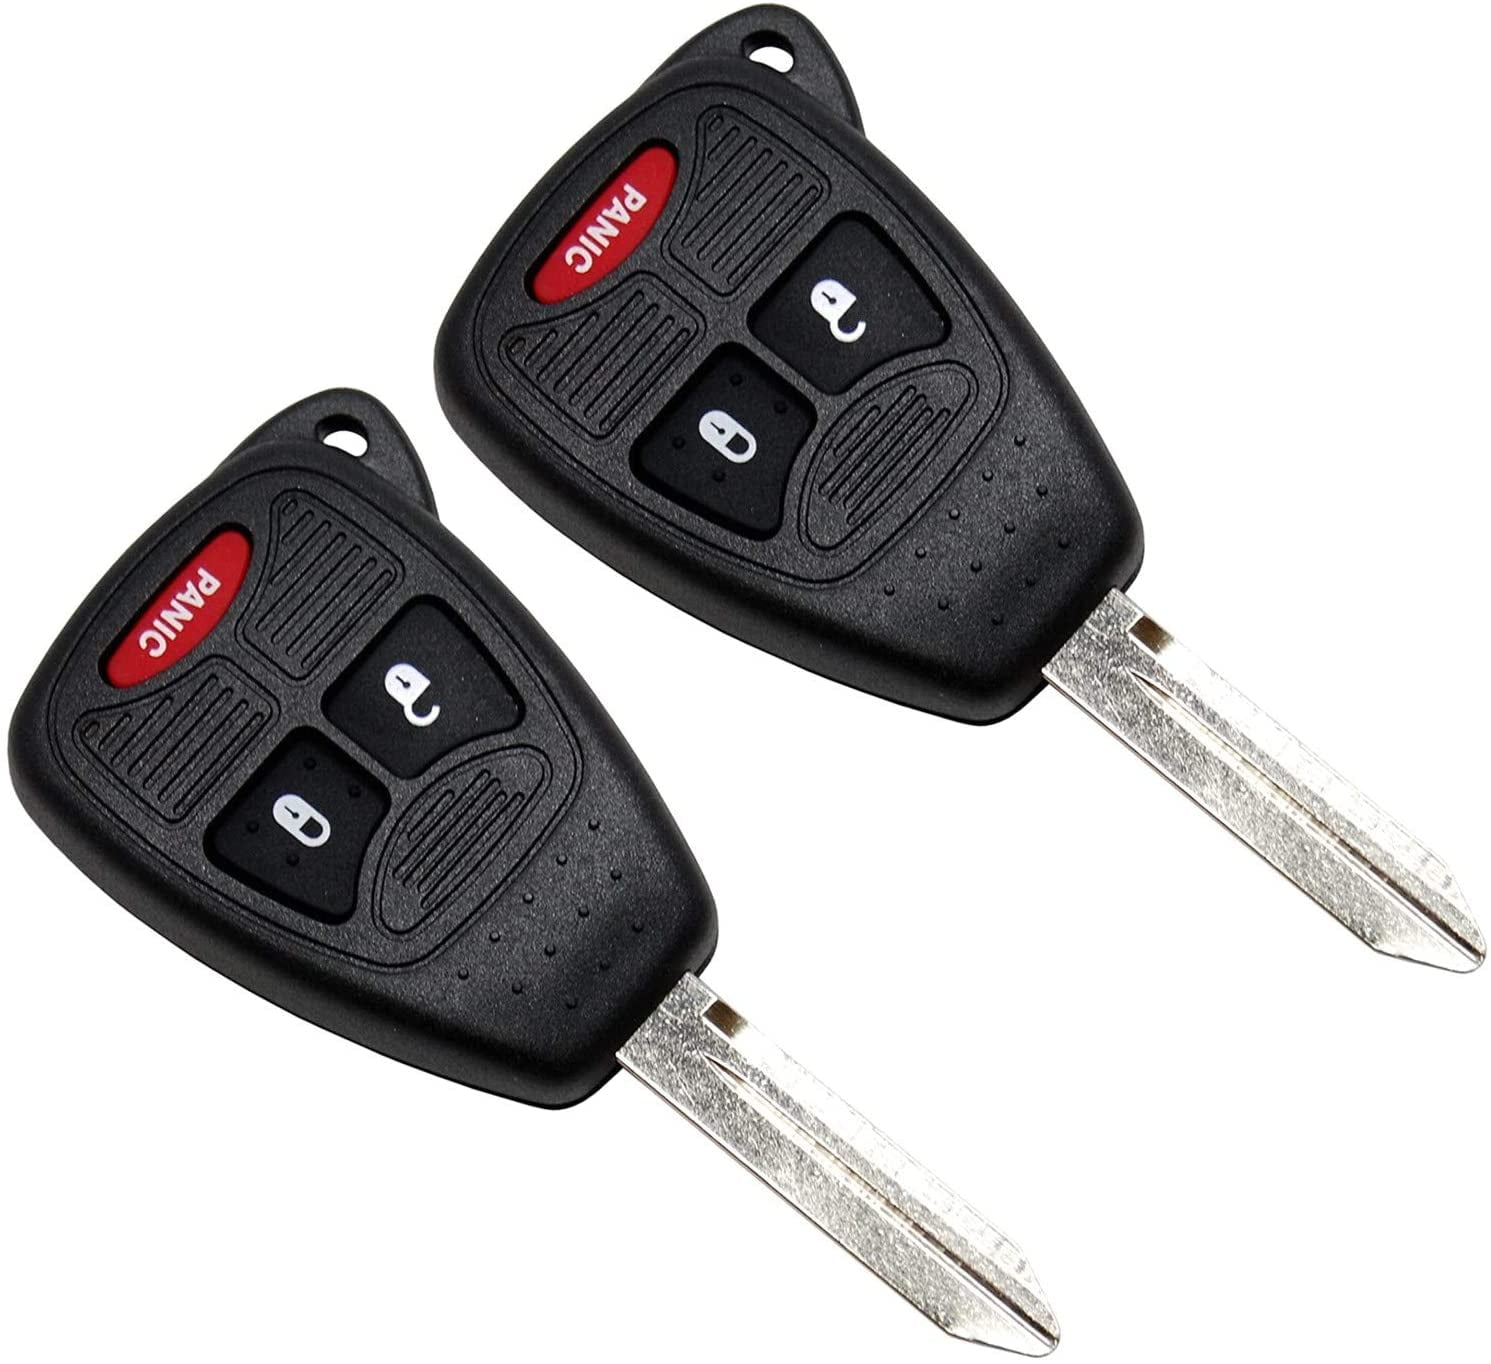 New Key Fob Remote Shell Case for a 2007 Chrysler PT Cruiser w/ 3 Buttons 